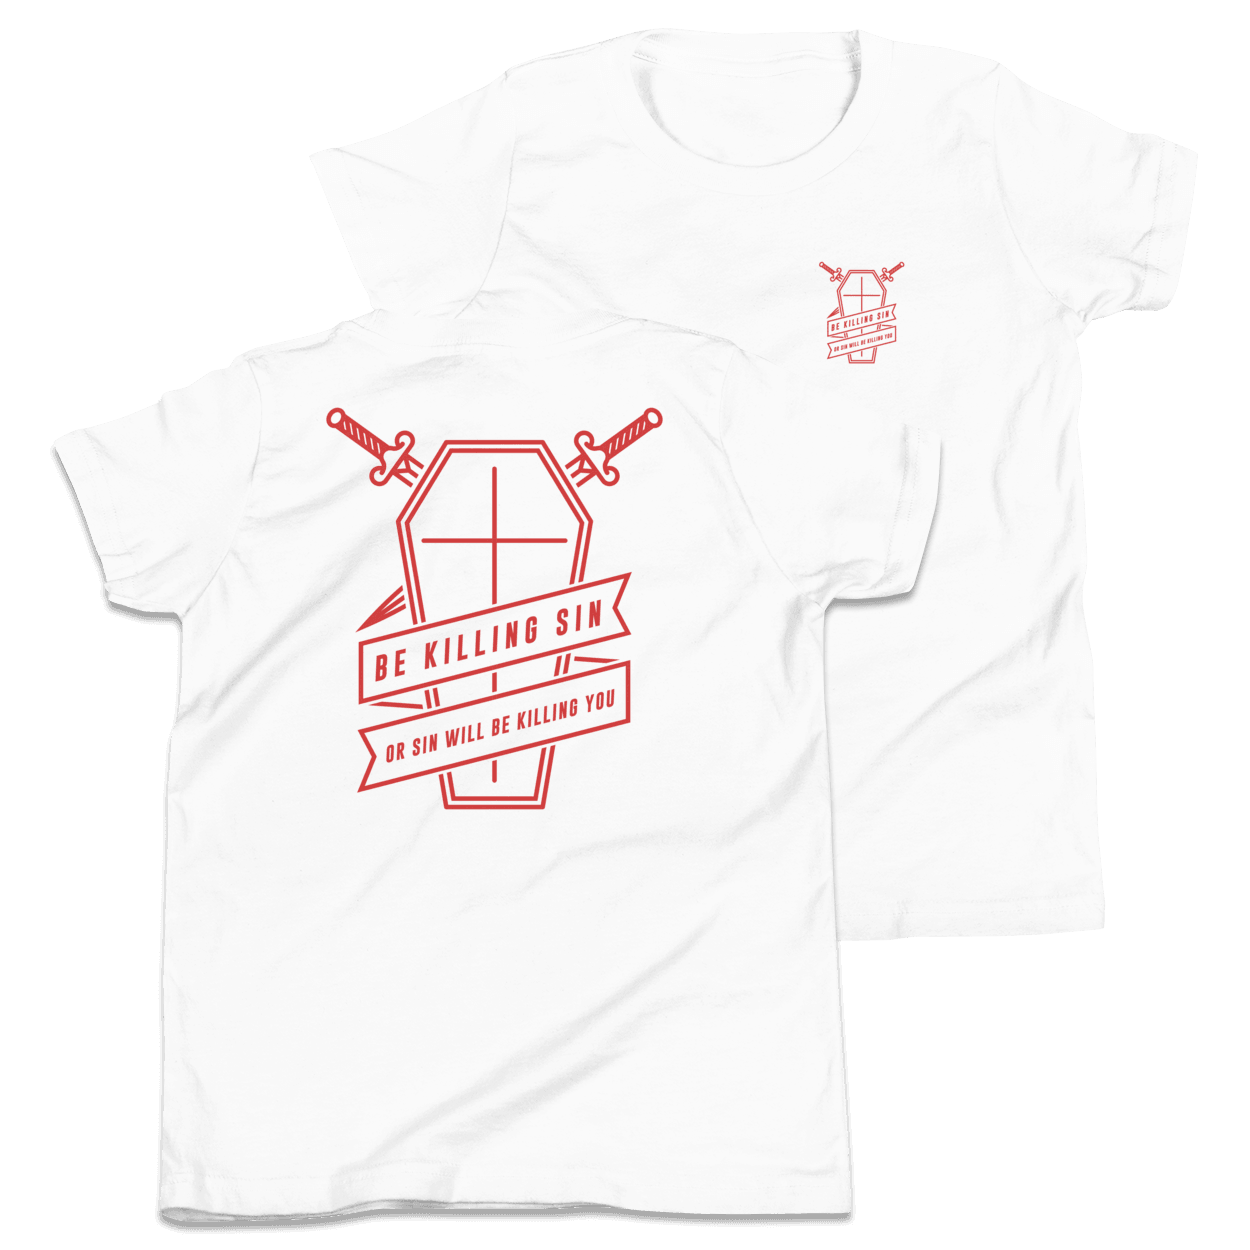 Be Killing Sin Youth T-Shirt - 1689 Designs